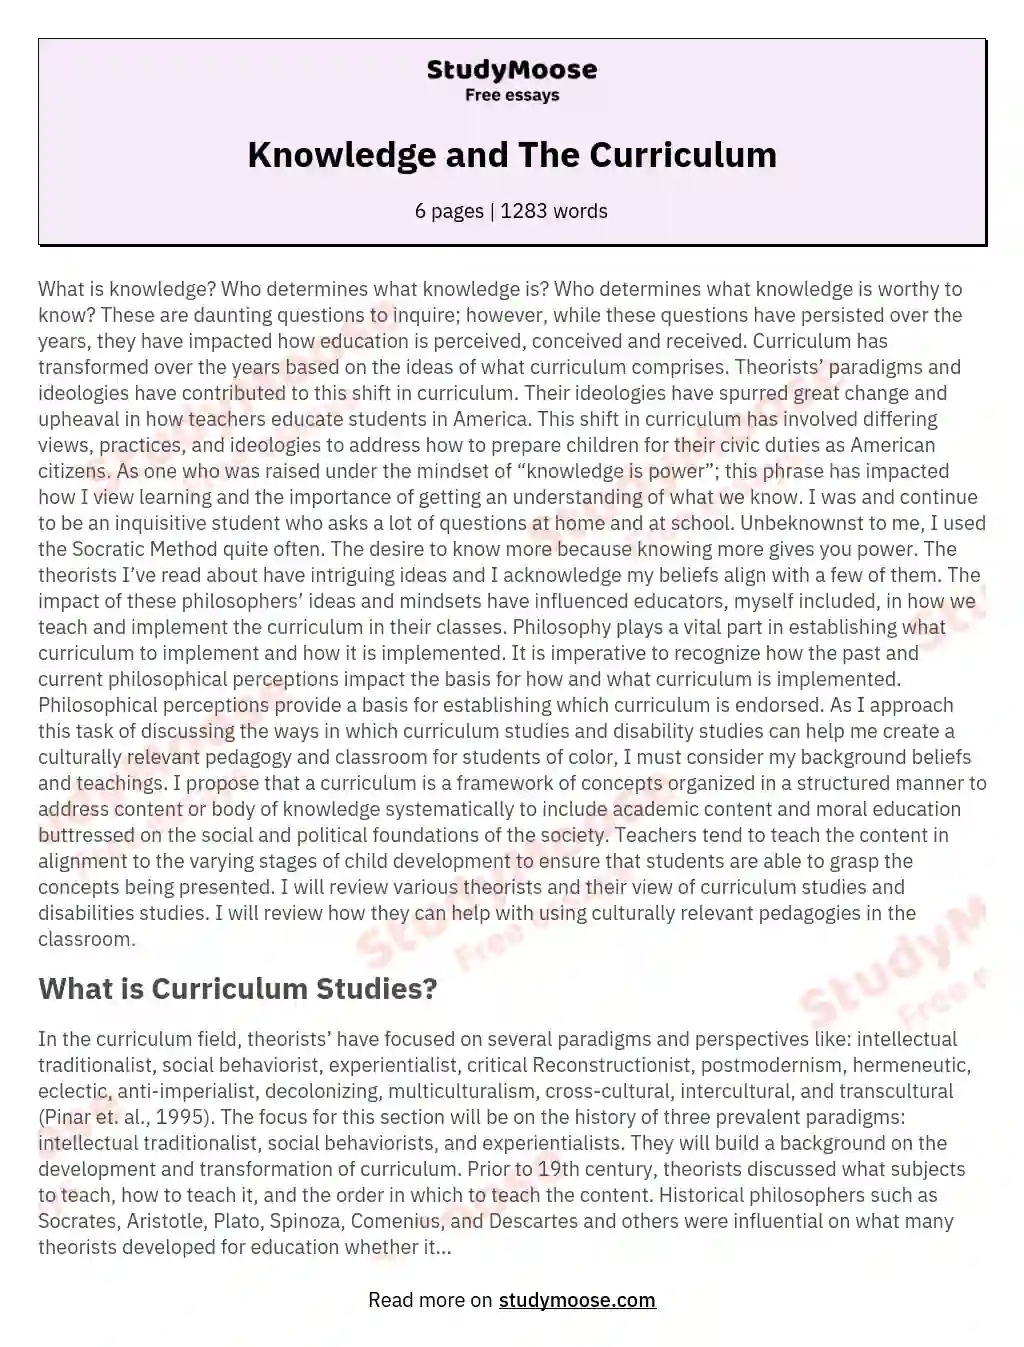 Knowledge and The Curriculum essay